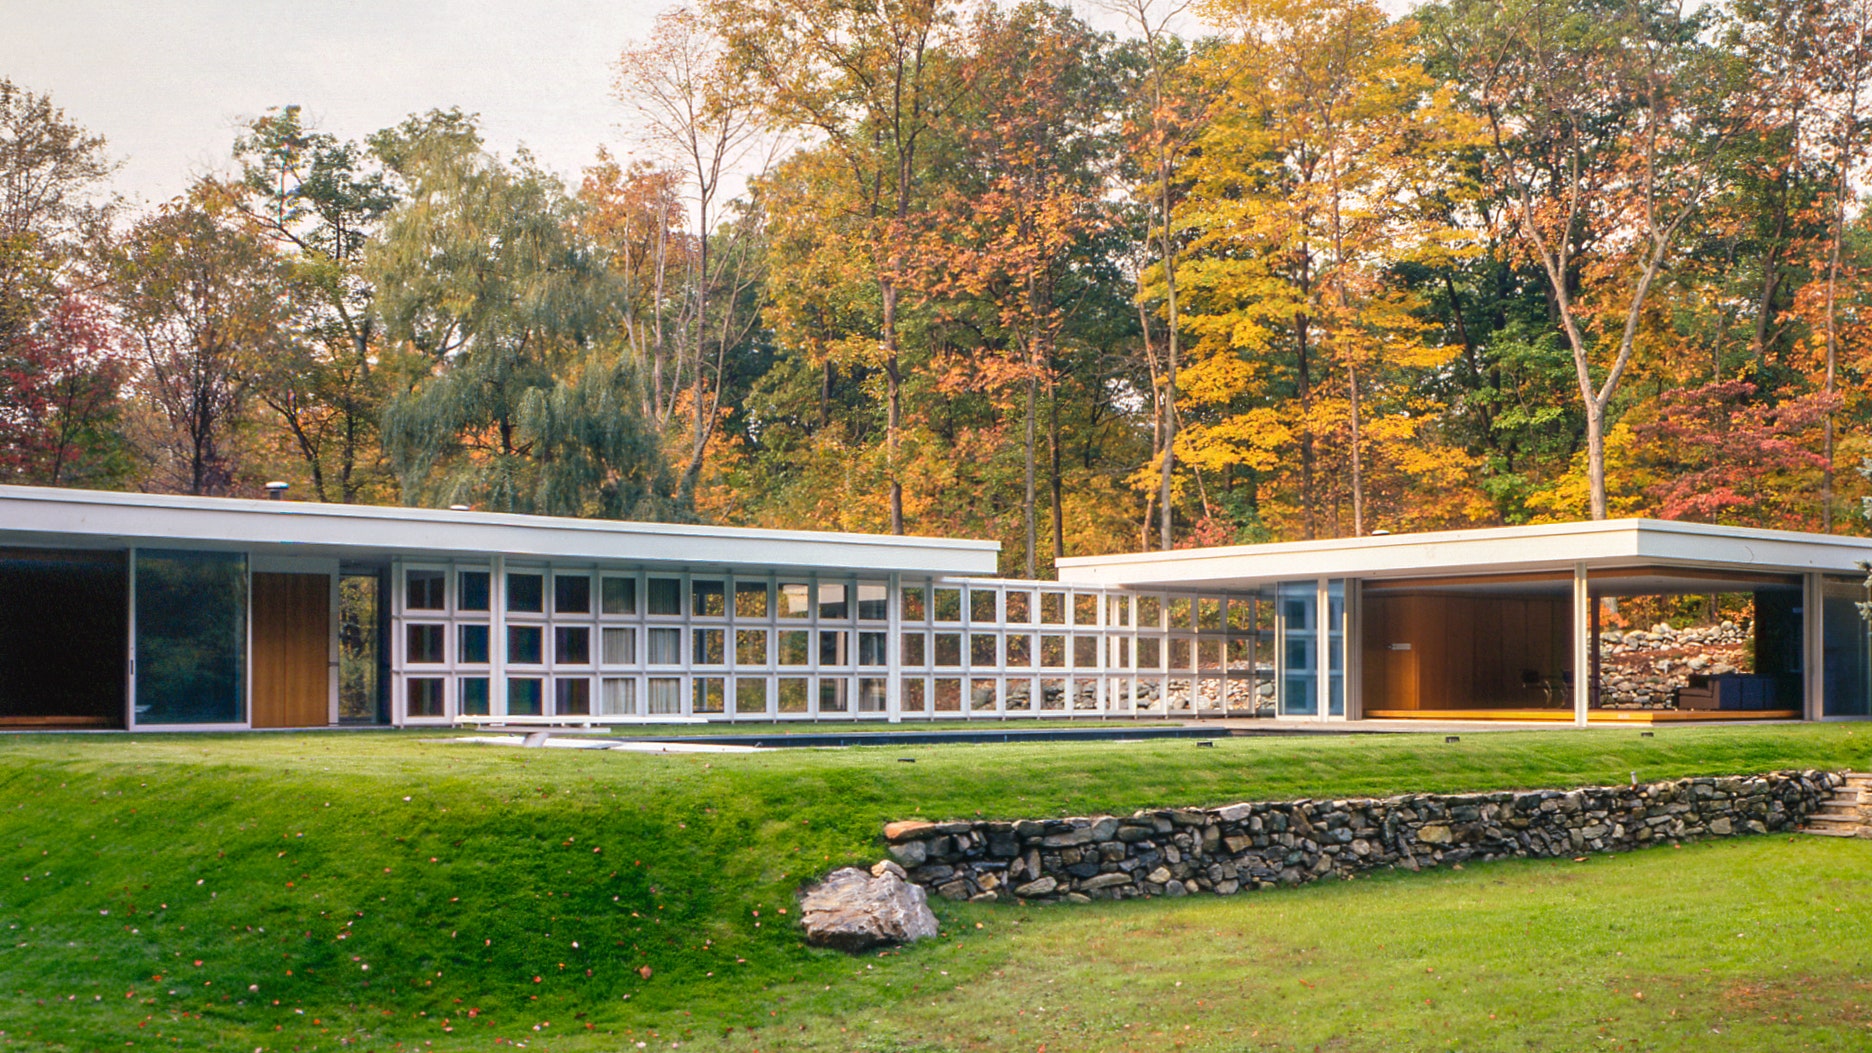 What is a mid-century modern home?